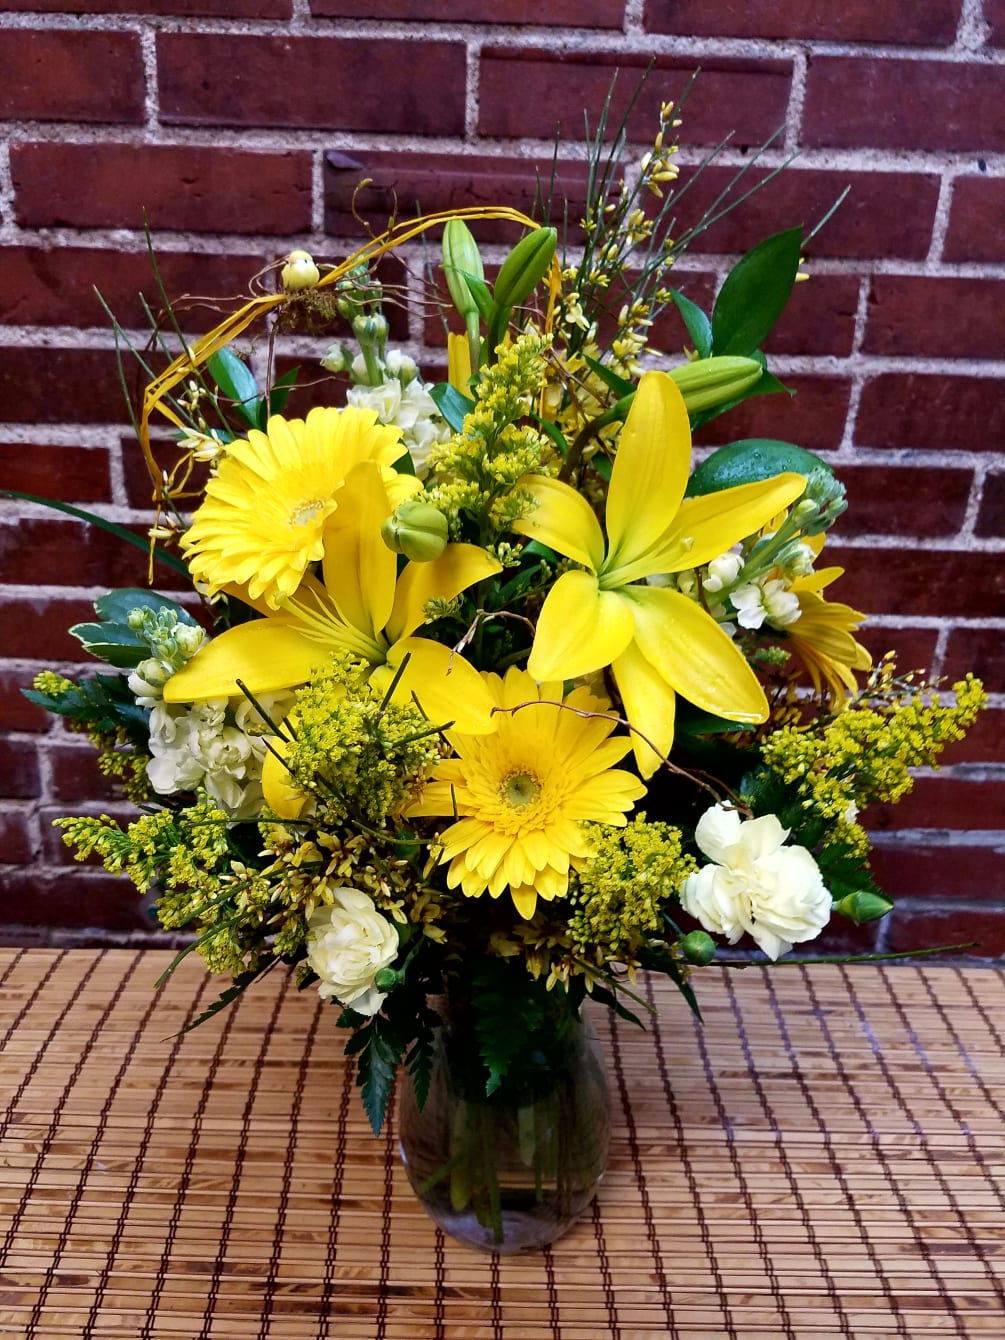 This gorgeous arrangement consists of yellow lilies, gerbera daisies, stock,  and